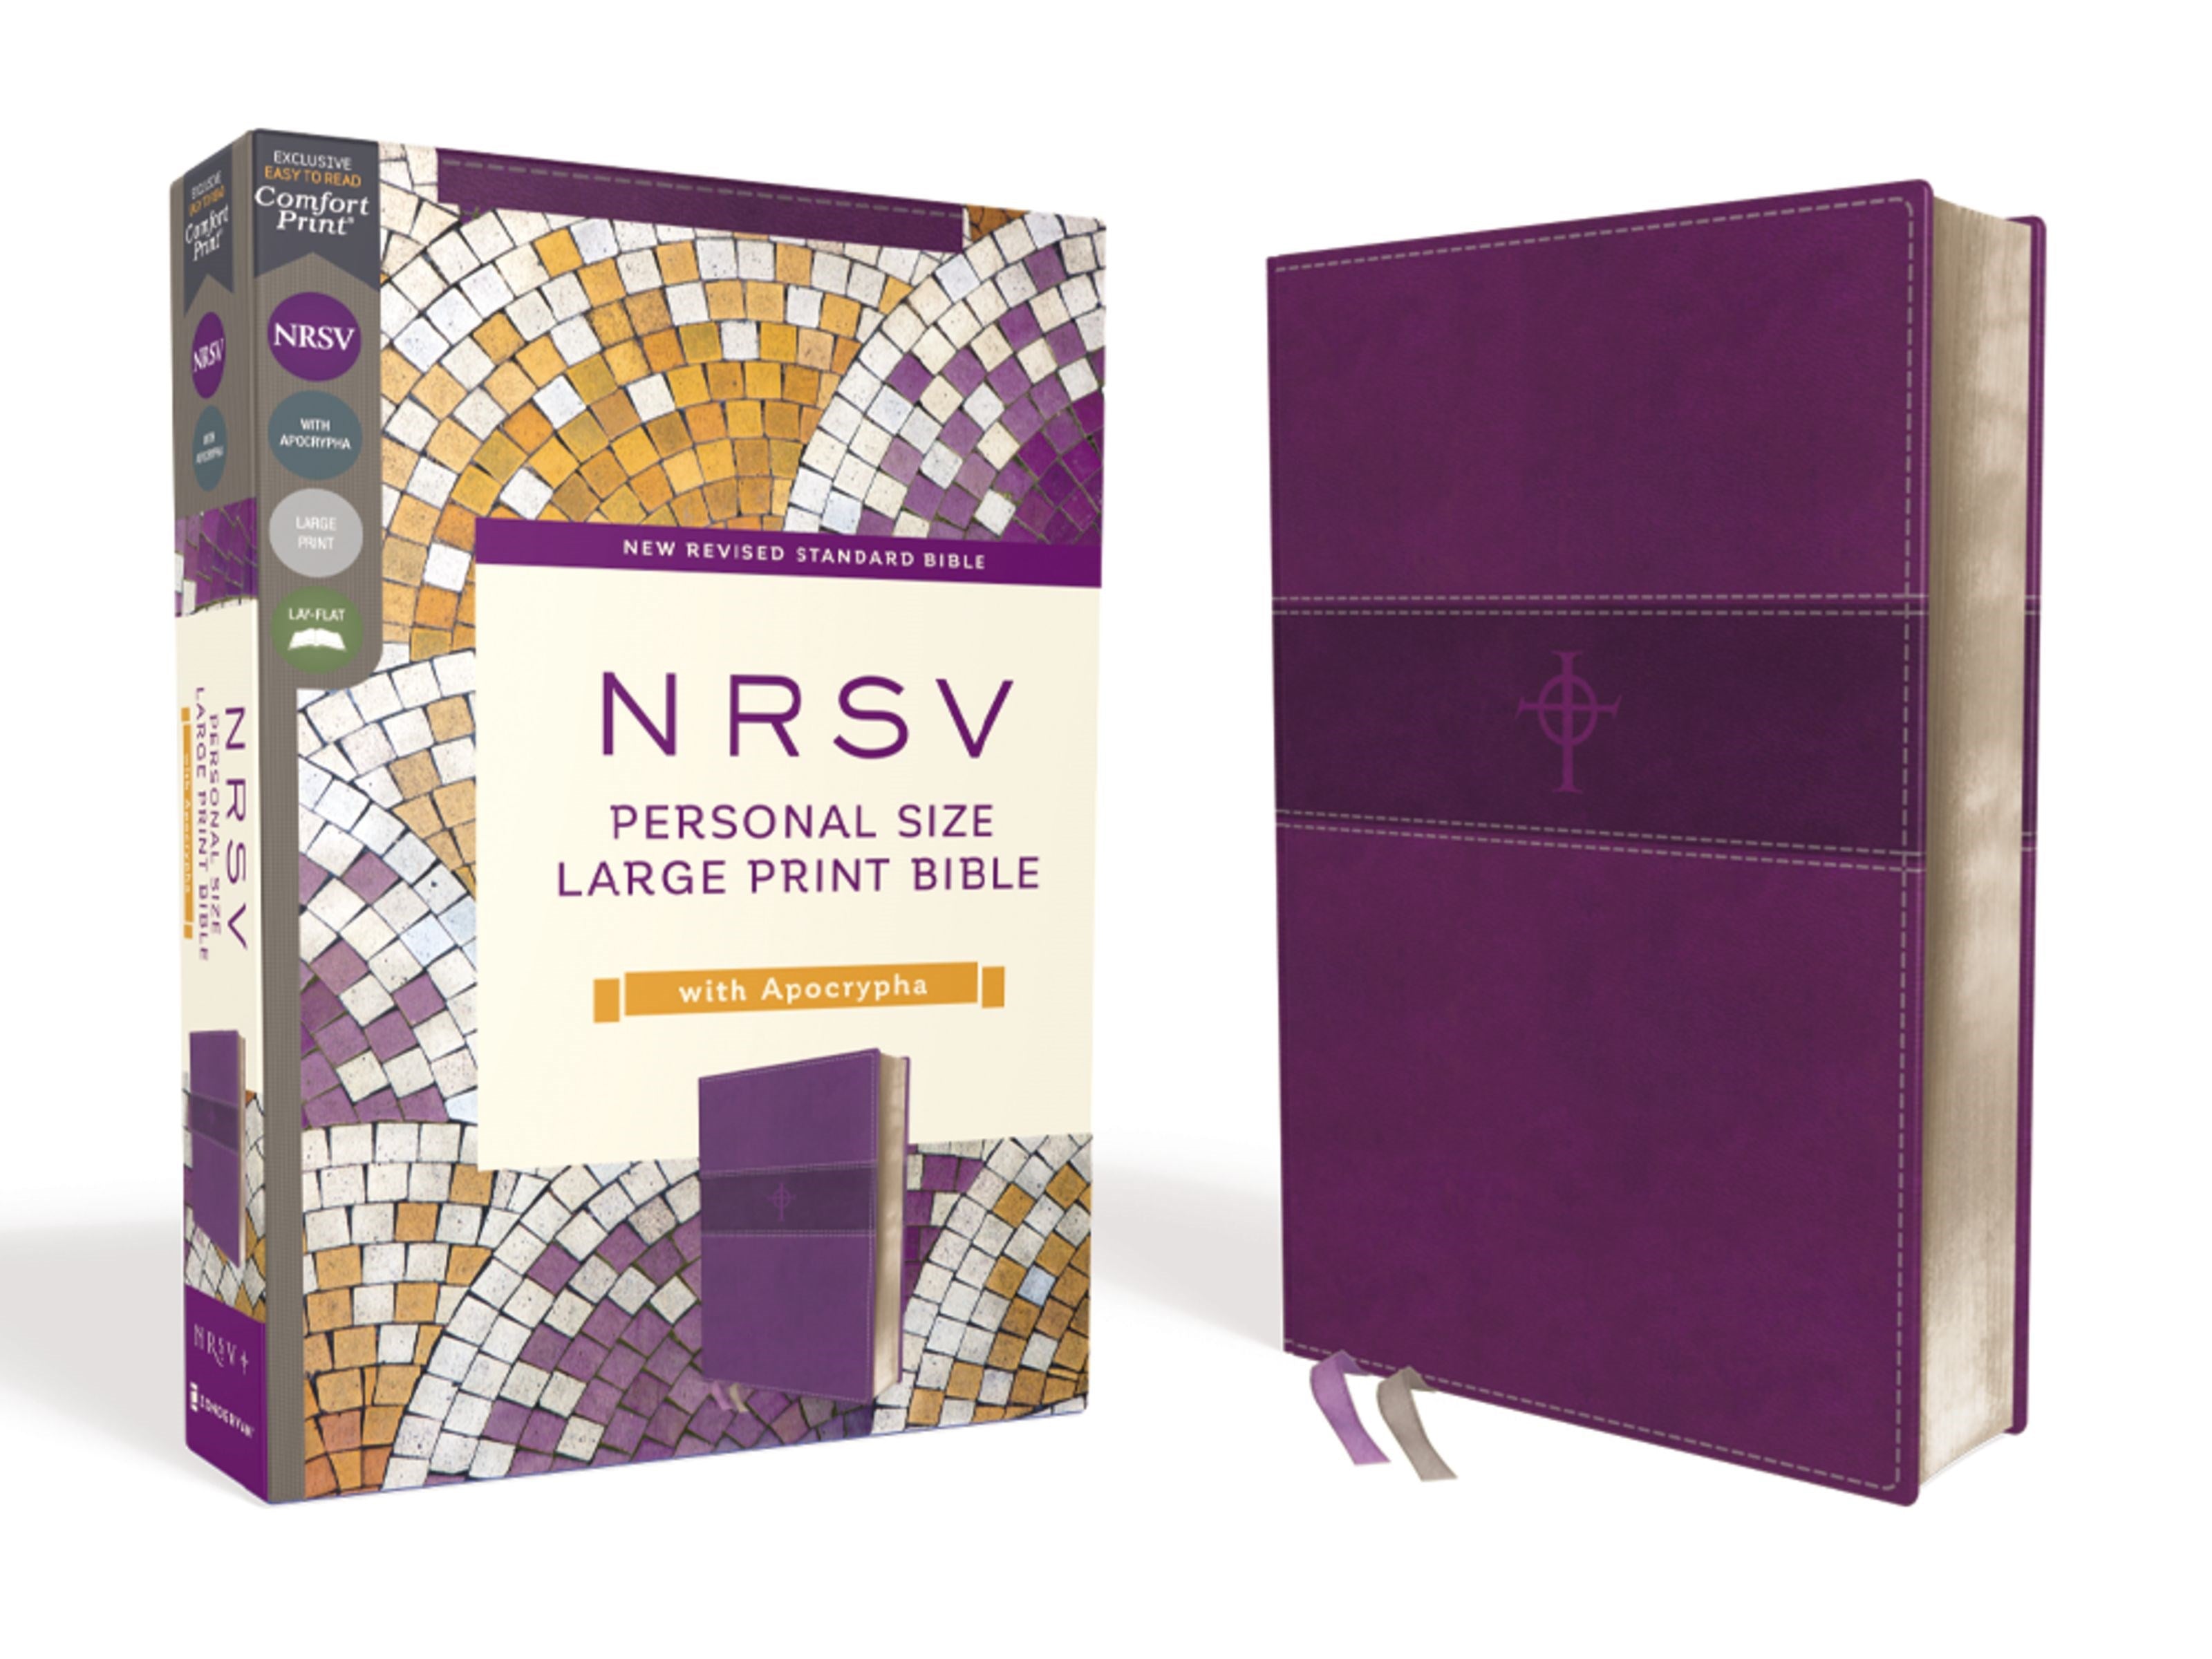 NRSV, Personal Size Large Print Bible with Apocrypha, Leathersoft, Purple, Comfort Print  (Large type / large print)